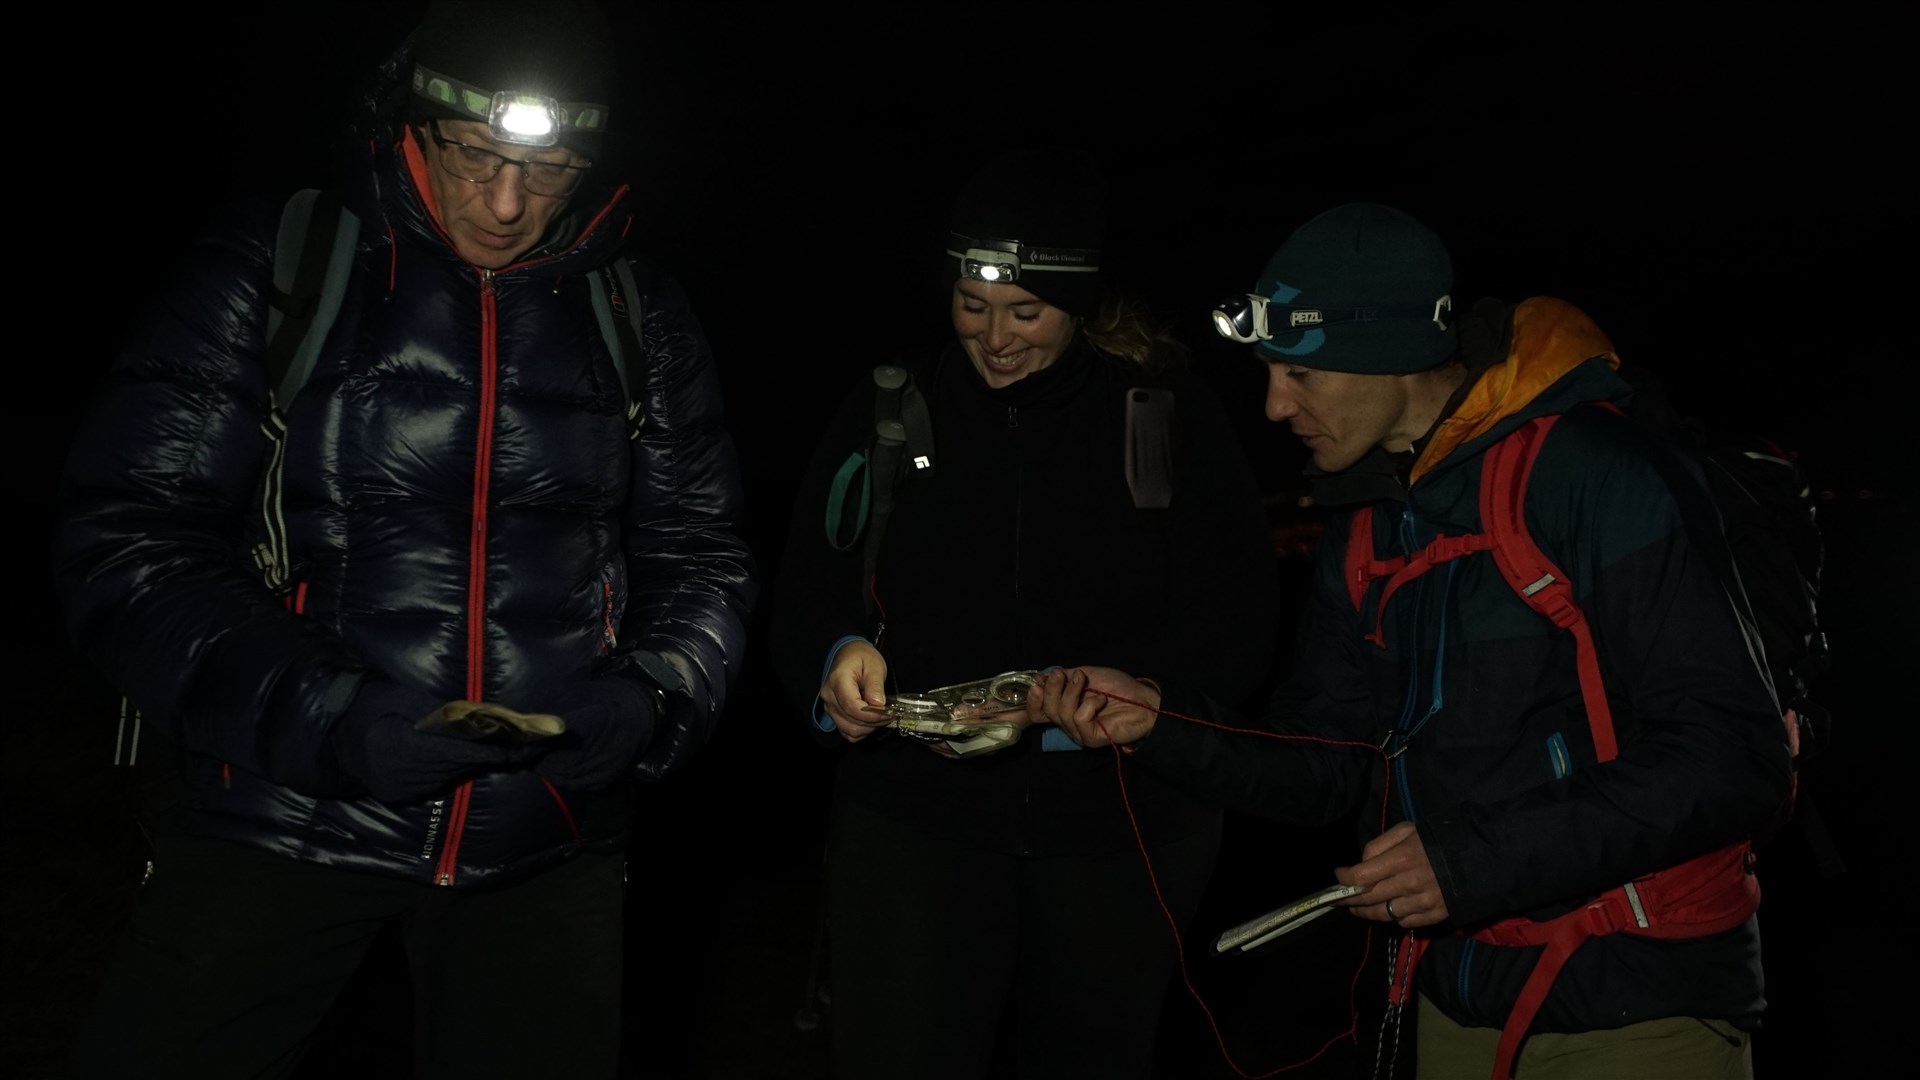 Navigating off the hill in darkness. Headtorches are an essential piece of kit.Picture: Paul Diffley